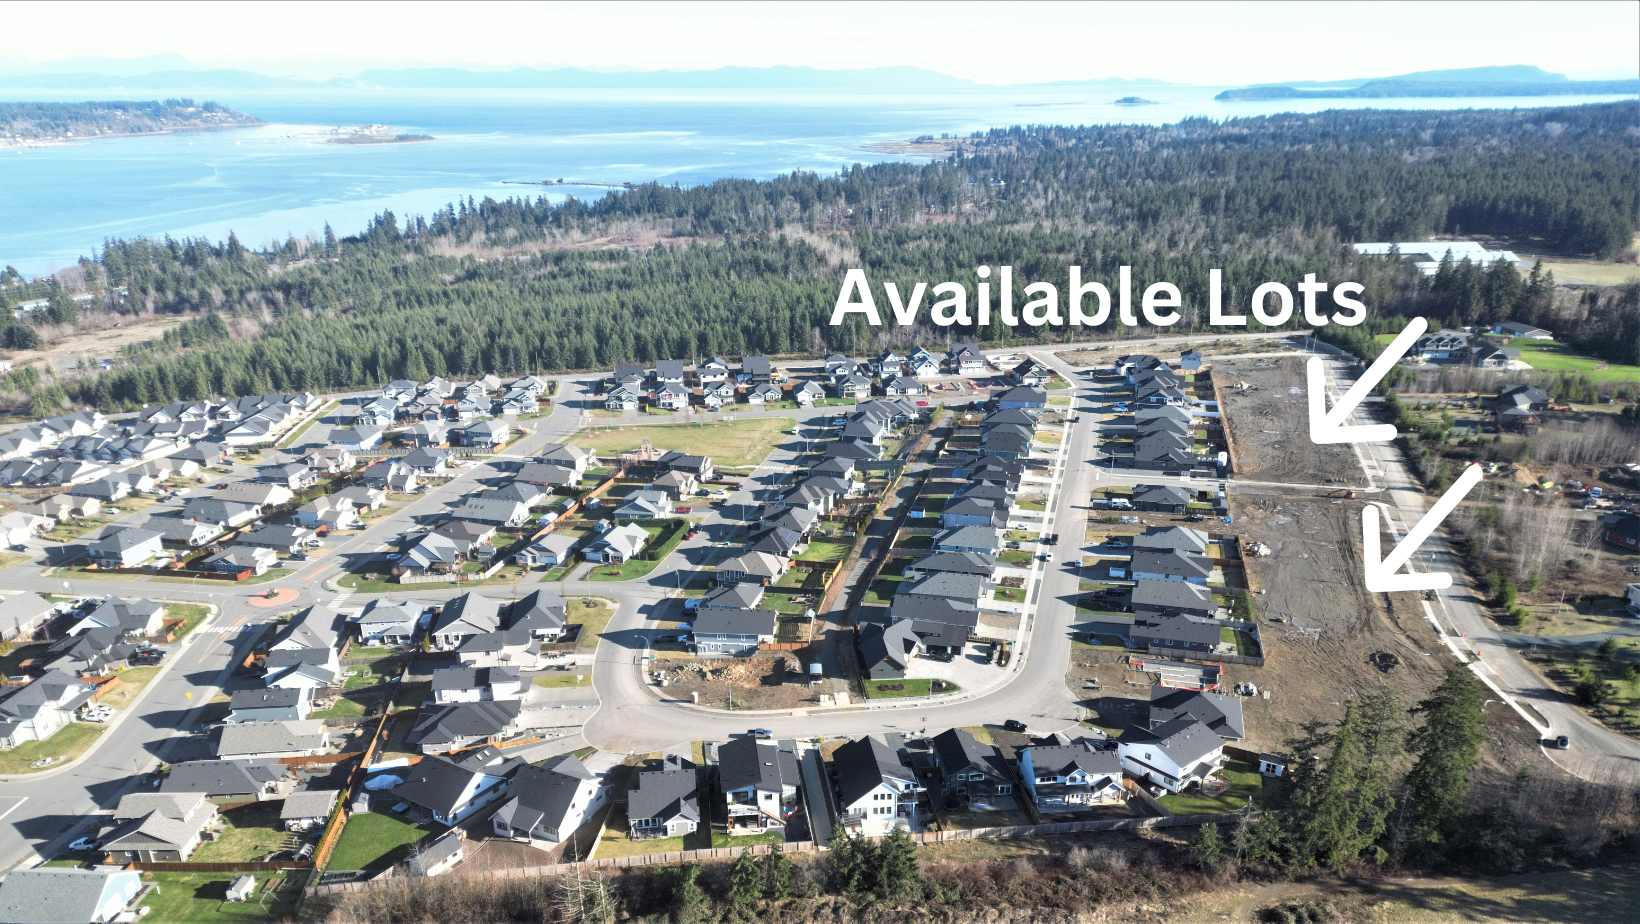 Available Lots to Build Your Custom Home in Courtenay, BC